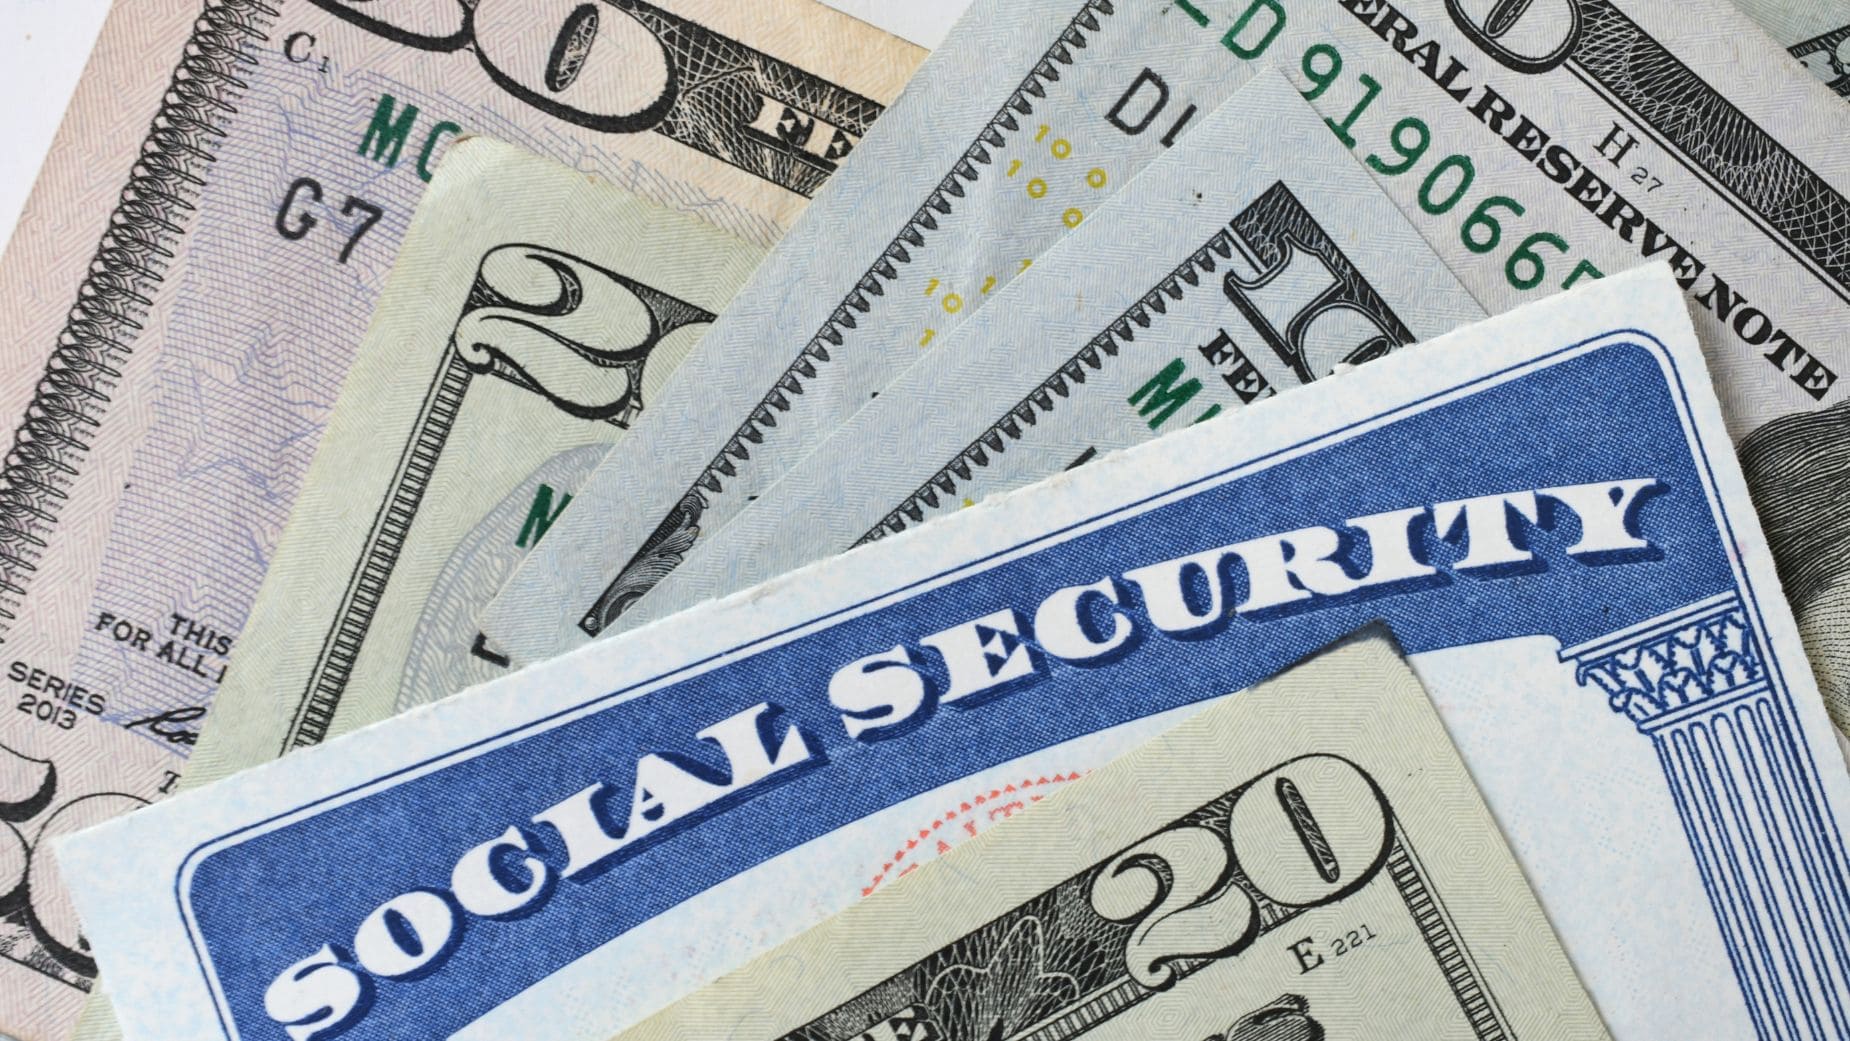 Check out when the Social Security will send the next payment in February